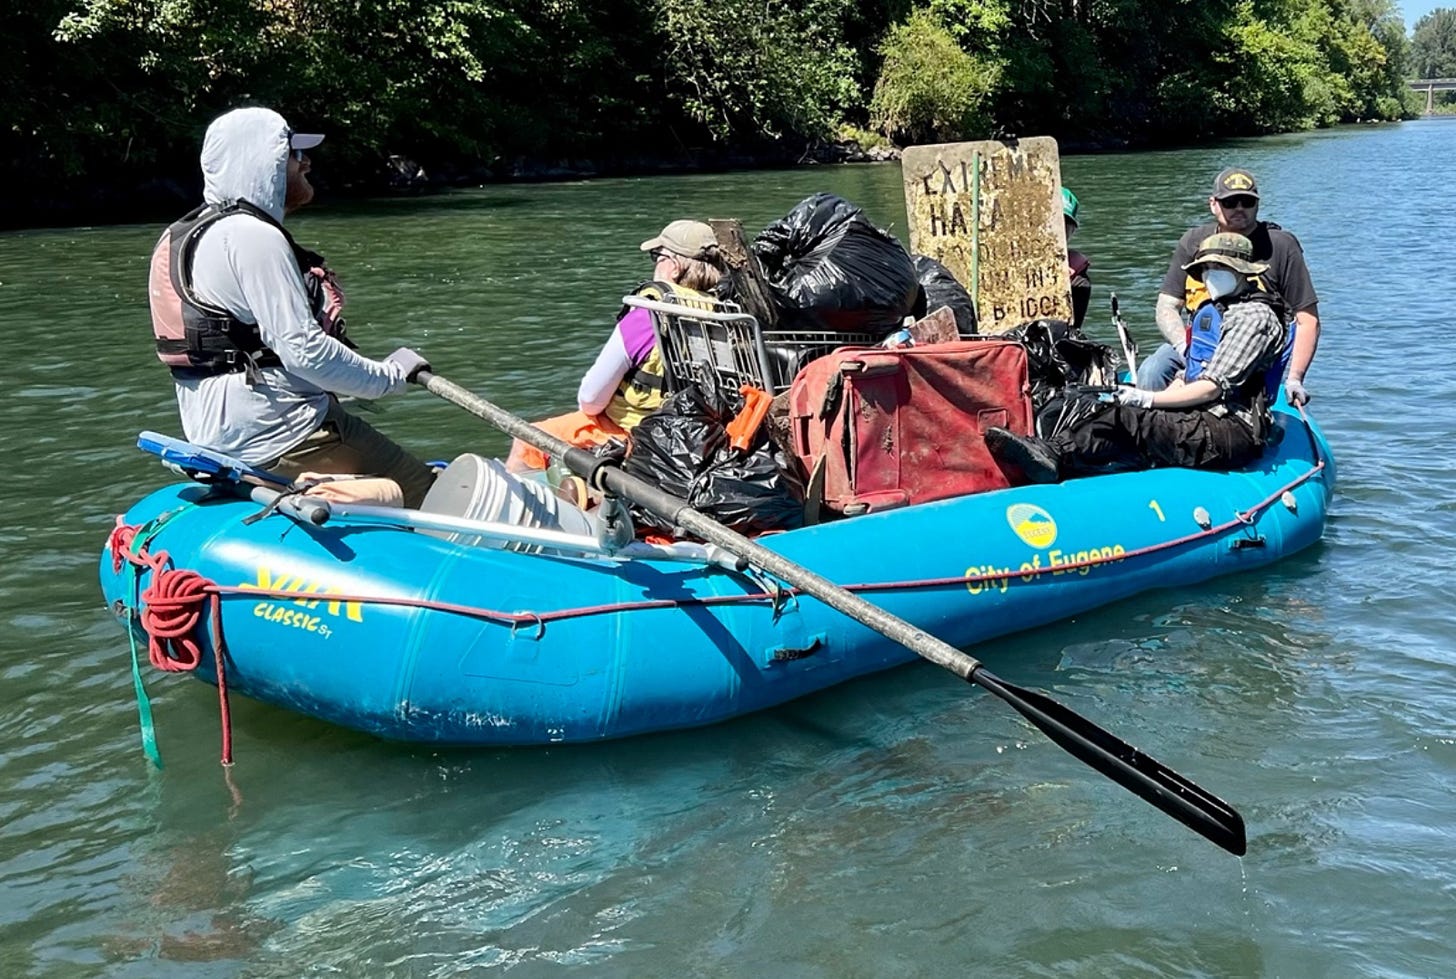 Three people on a blue raft that is full of trash, including a grocery cart, suitcase, buckets, and an old metal sign.